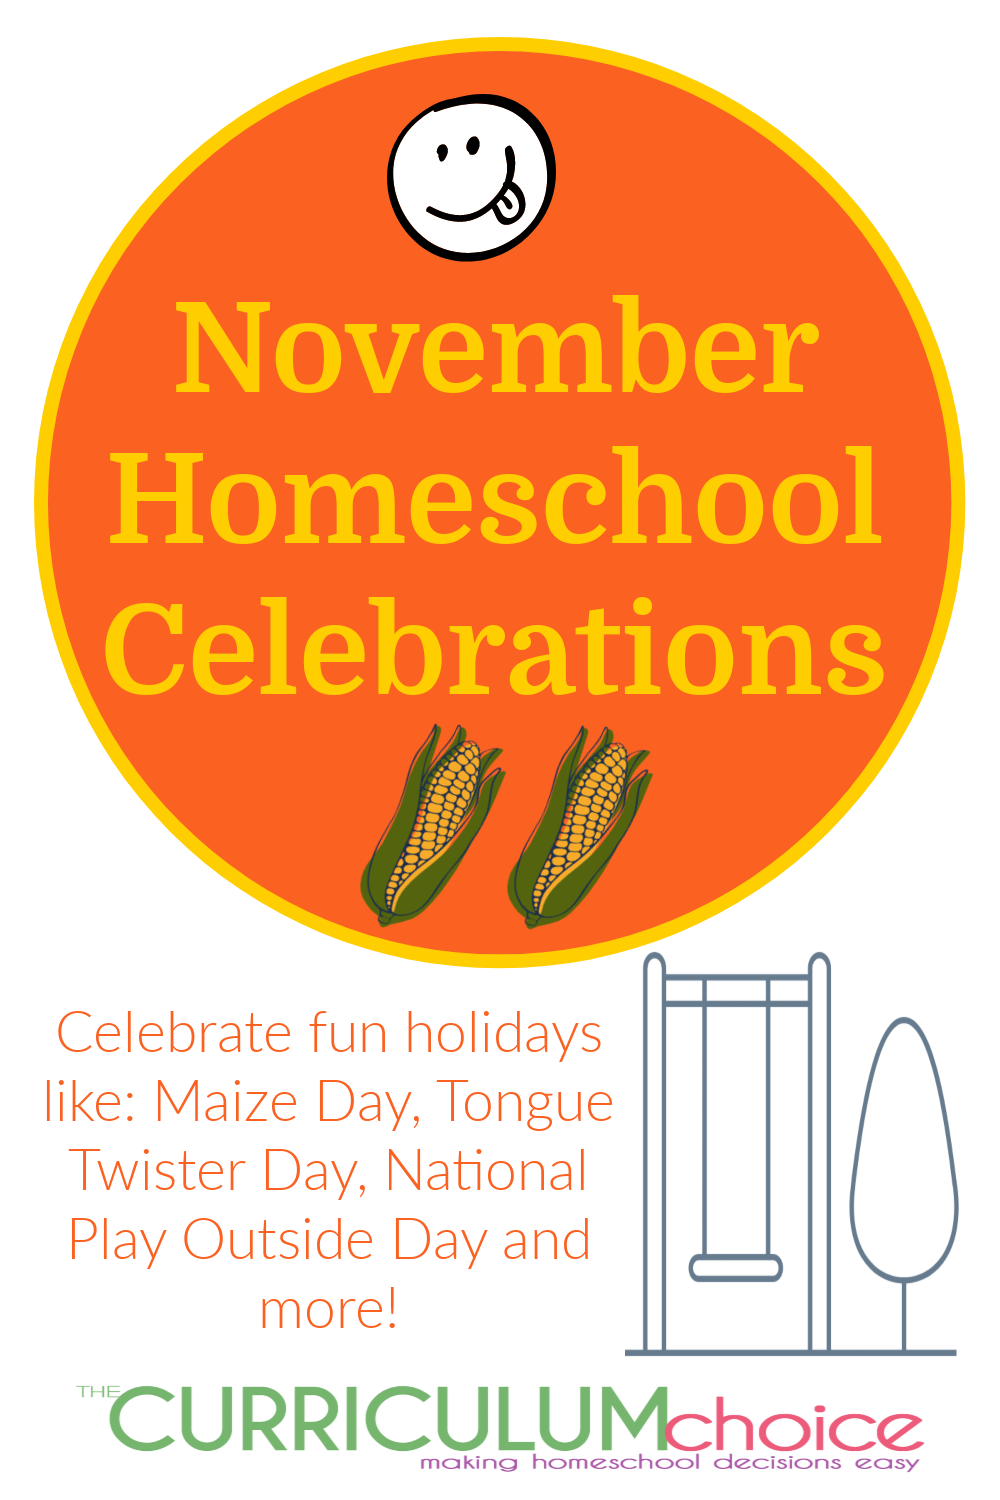 November Homeschool Celebrations - Celebrate fun holidays like National Play Outside Day, Maize Day, Jellyfish Day, and Tongue Twister Day!